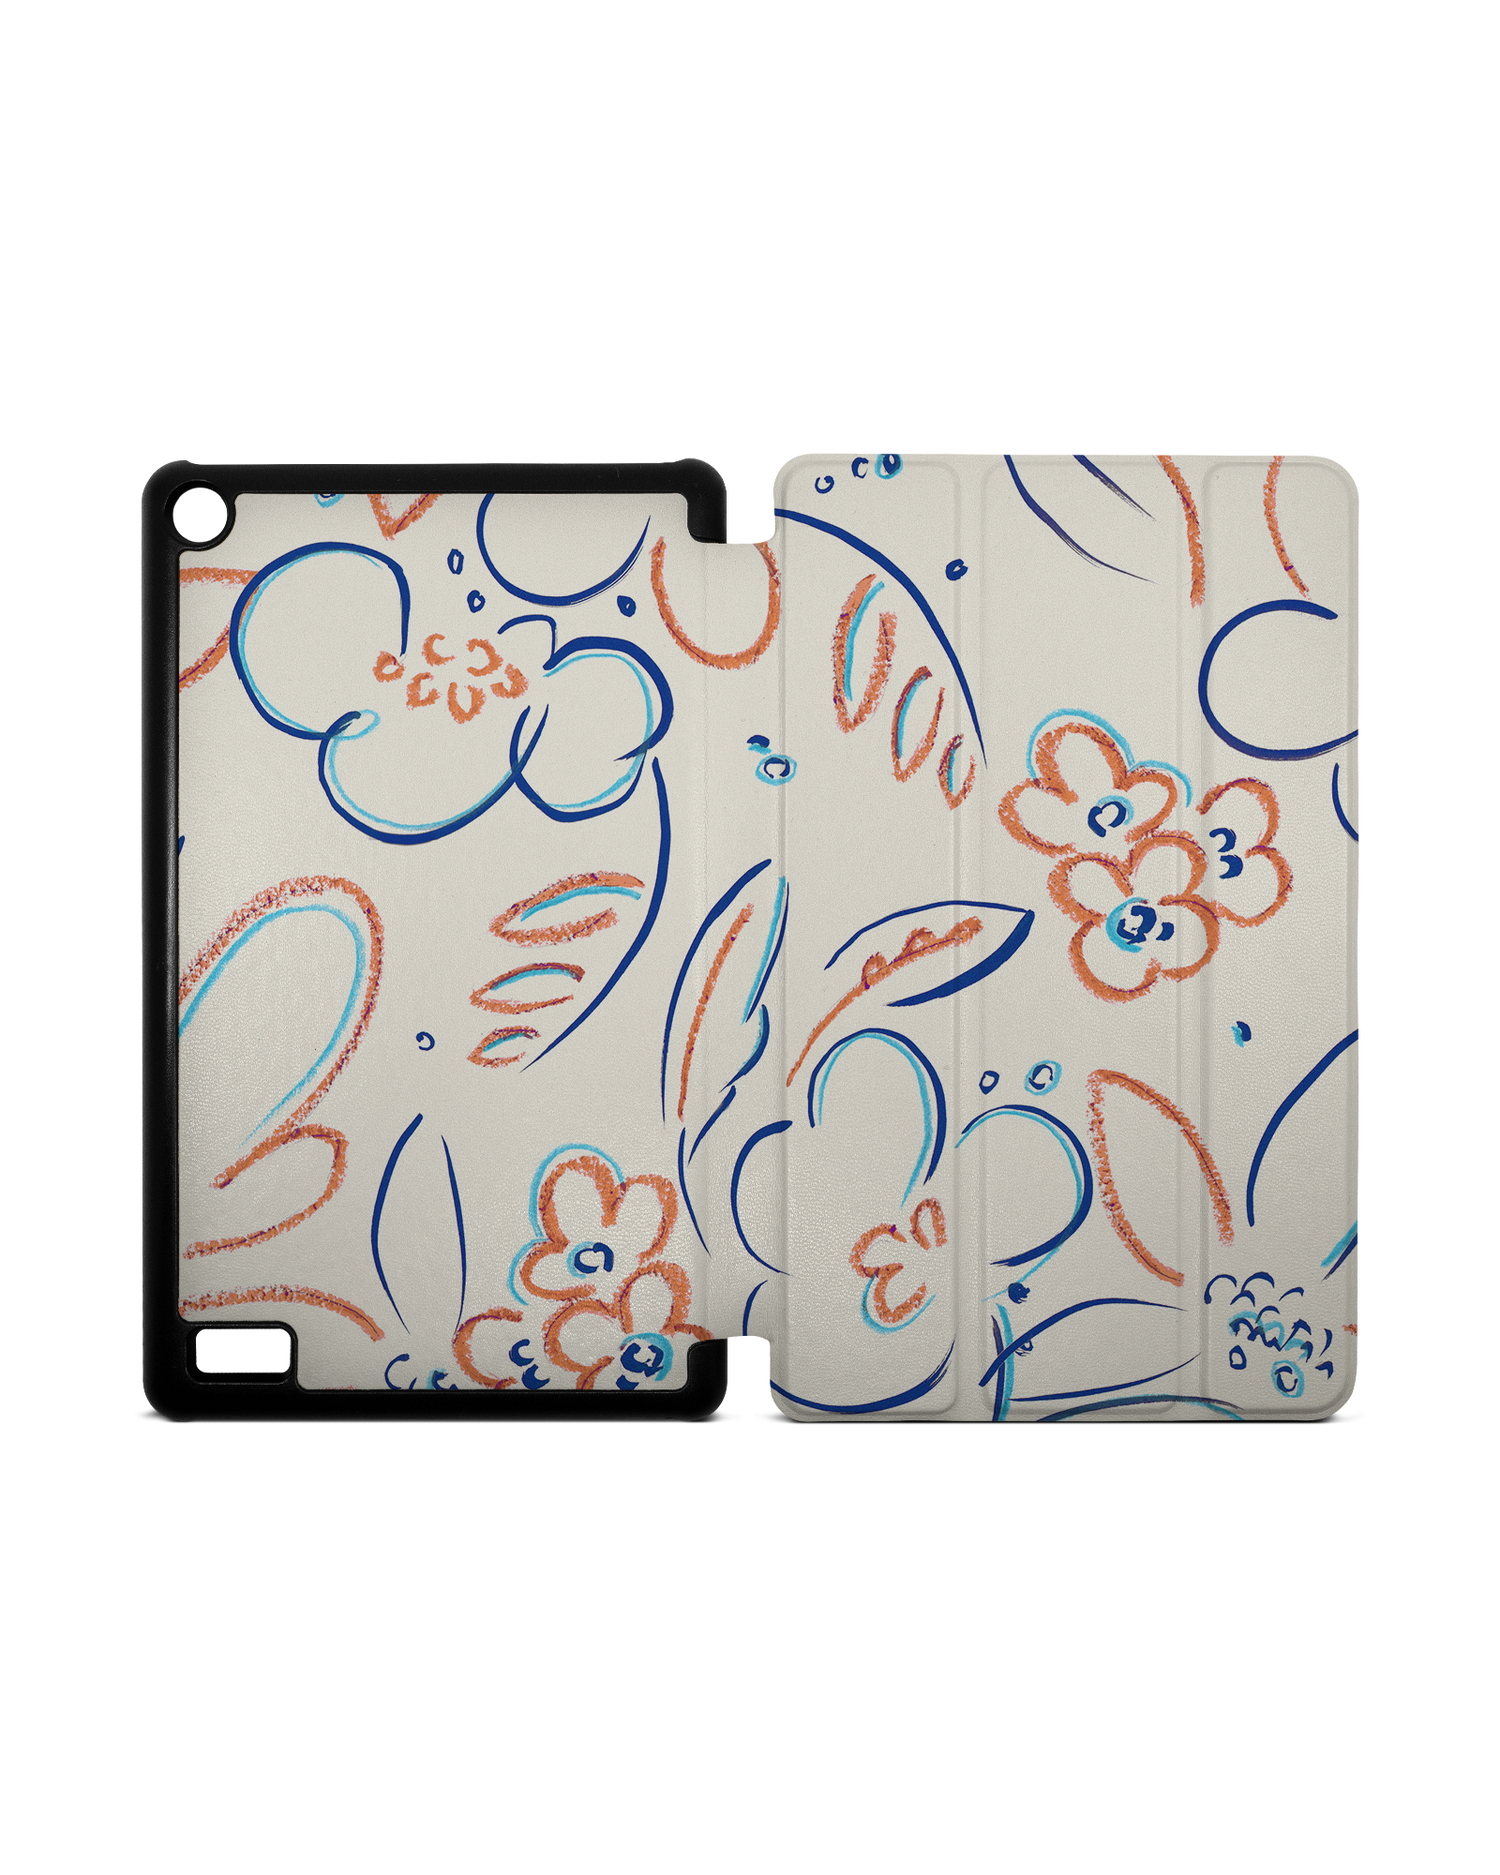 Bloom Doodles Tablet Smart Case for Amazon Fire 7: Opened